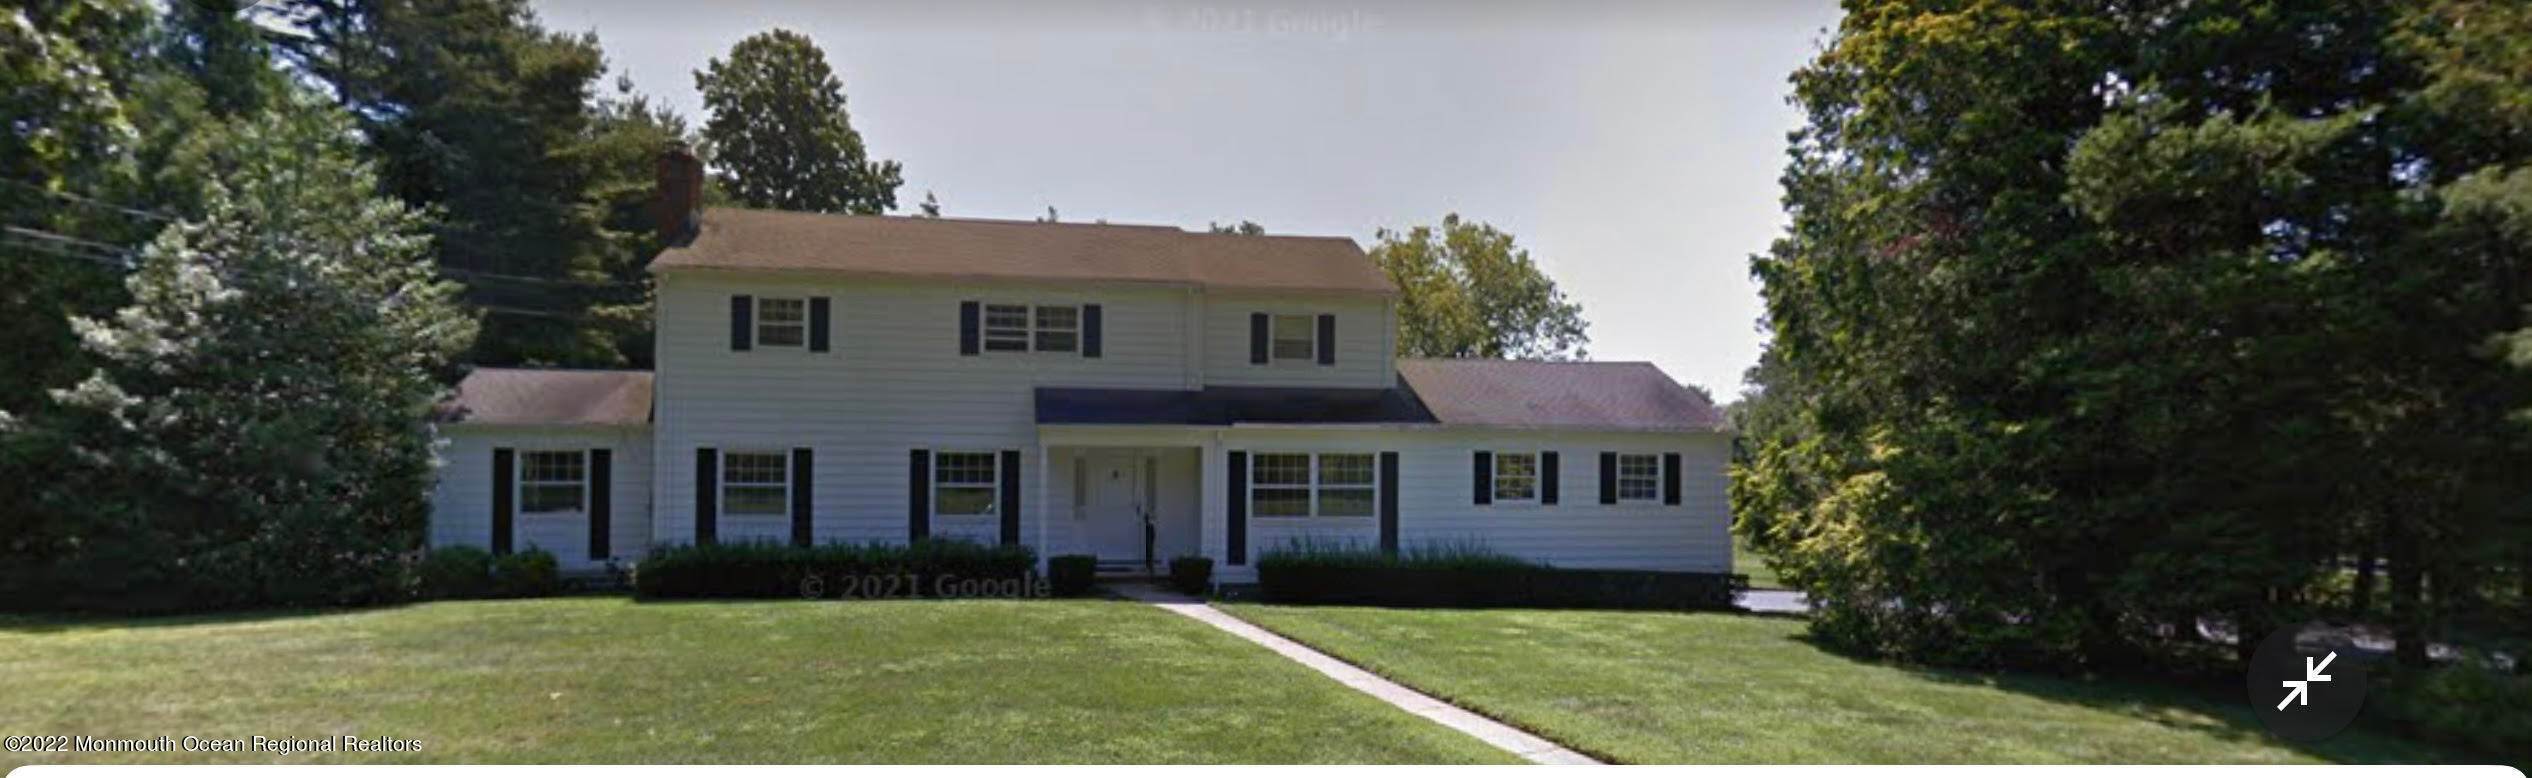 Residential Lease at 7 Hasler Lane Little Silver, New Jersey 07739 United States